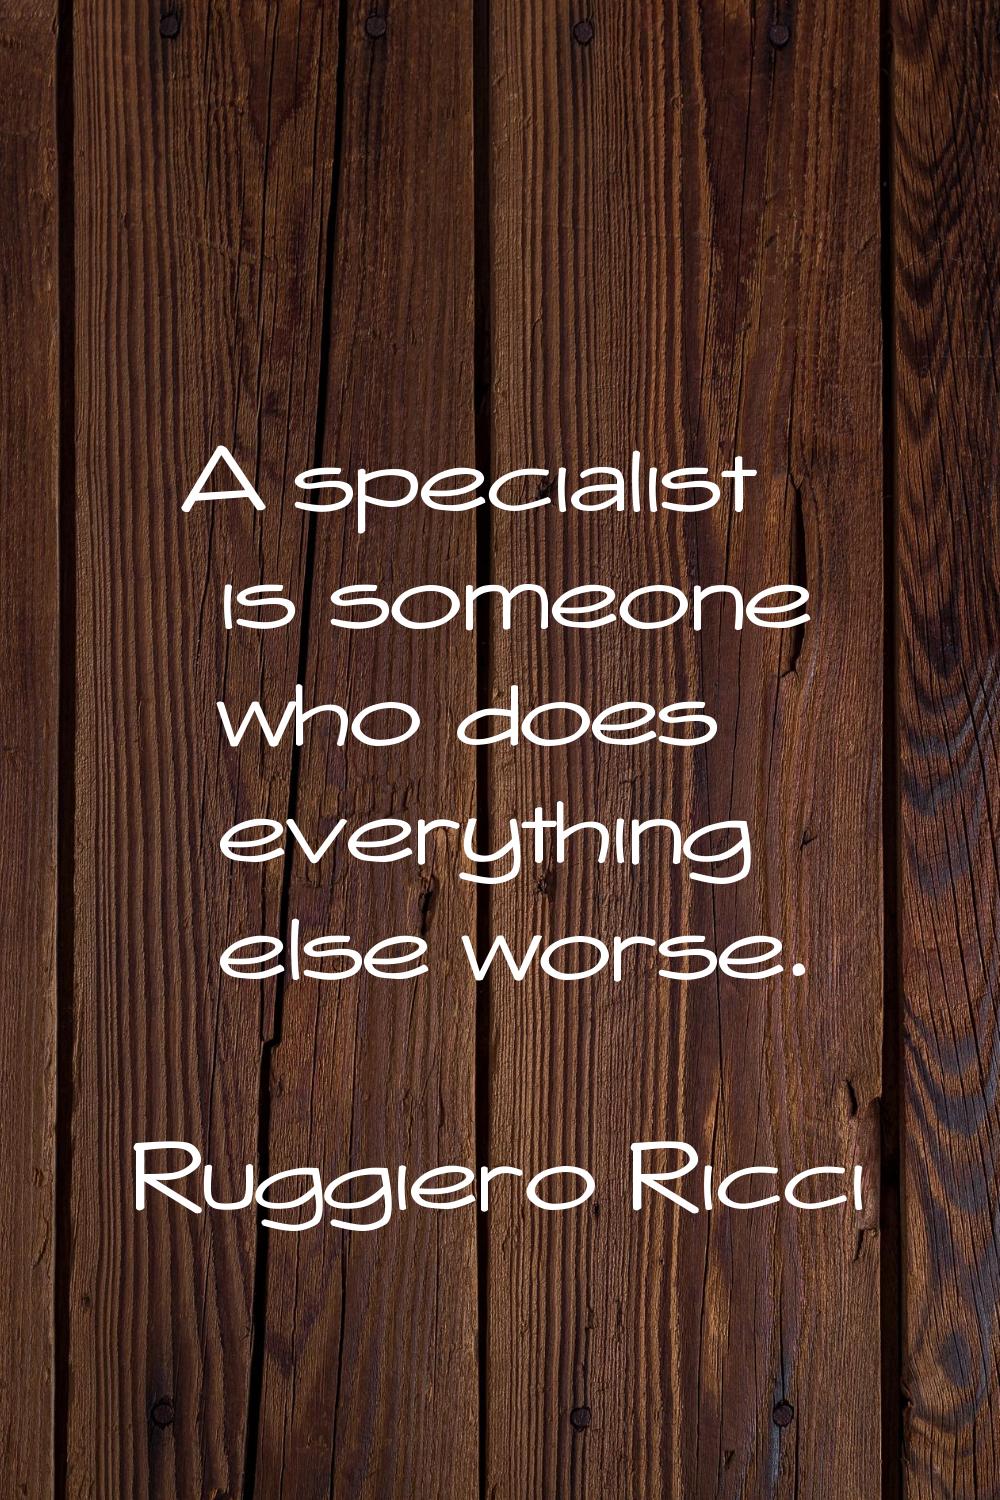 A specialist is someone who does everything else worse.